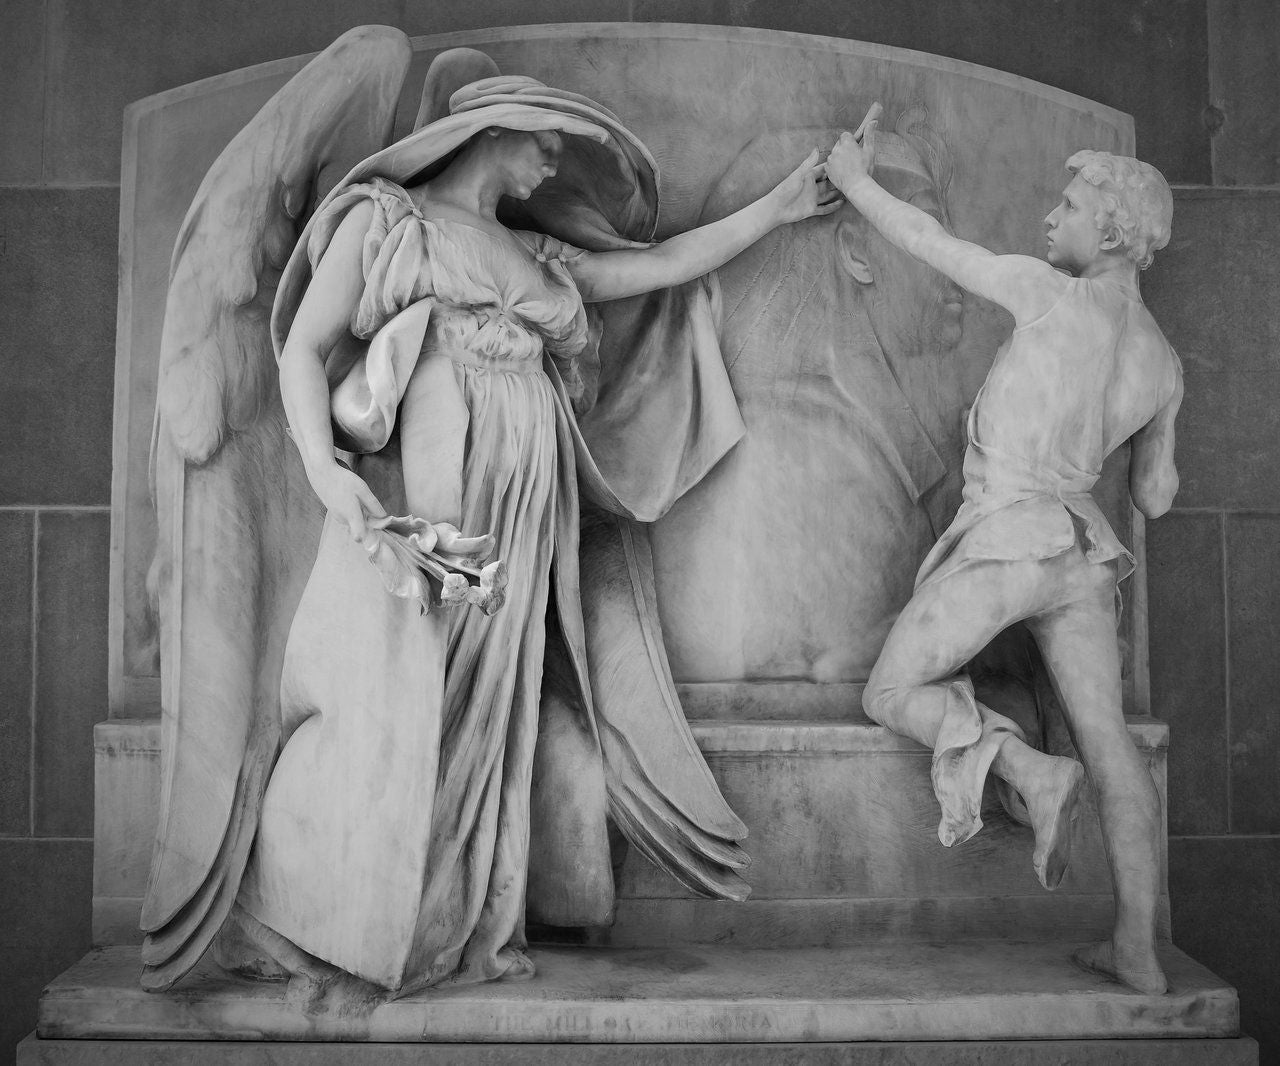 The Angel of Death and the Sculptor" by Daniel Chester French